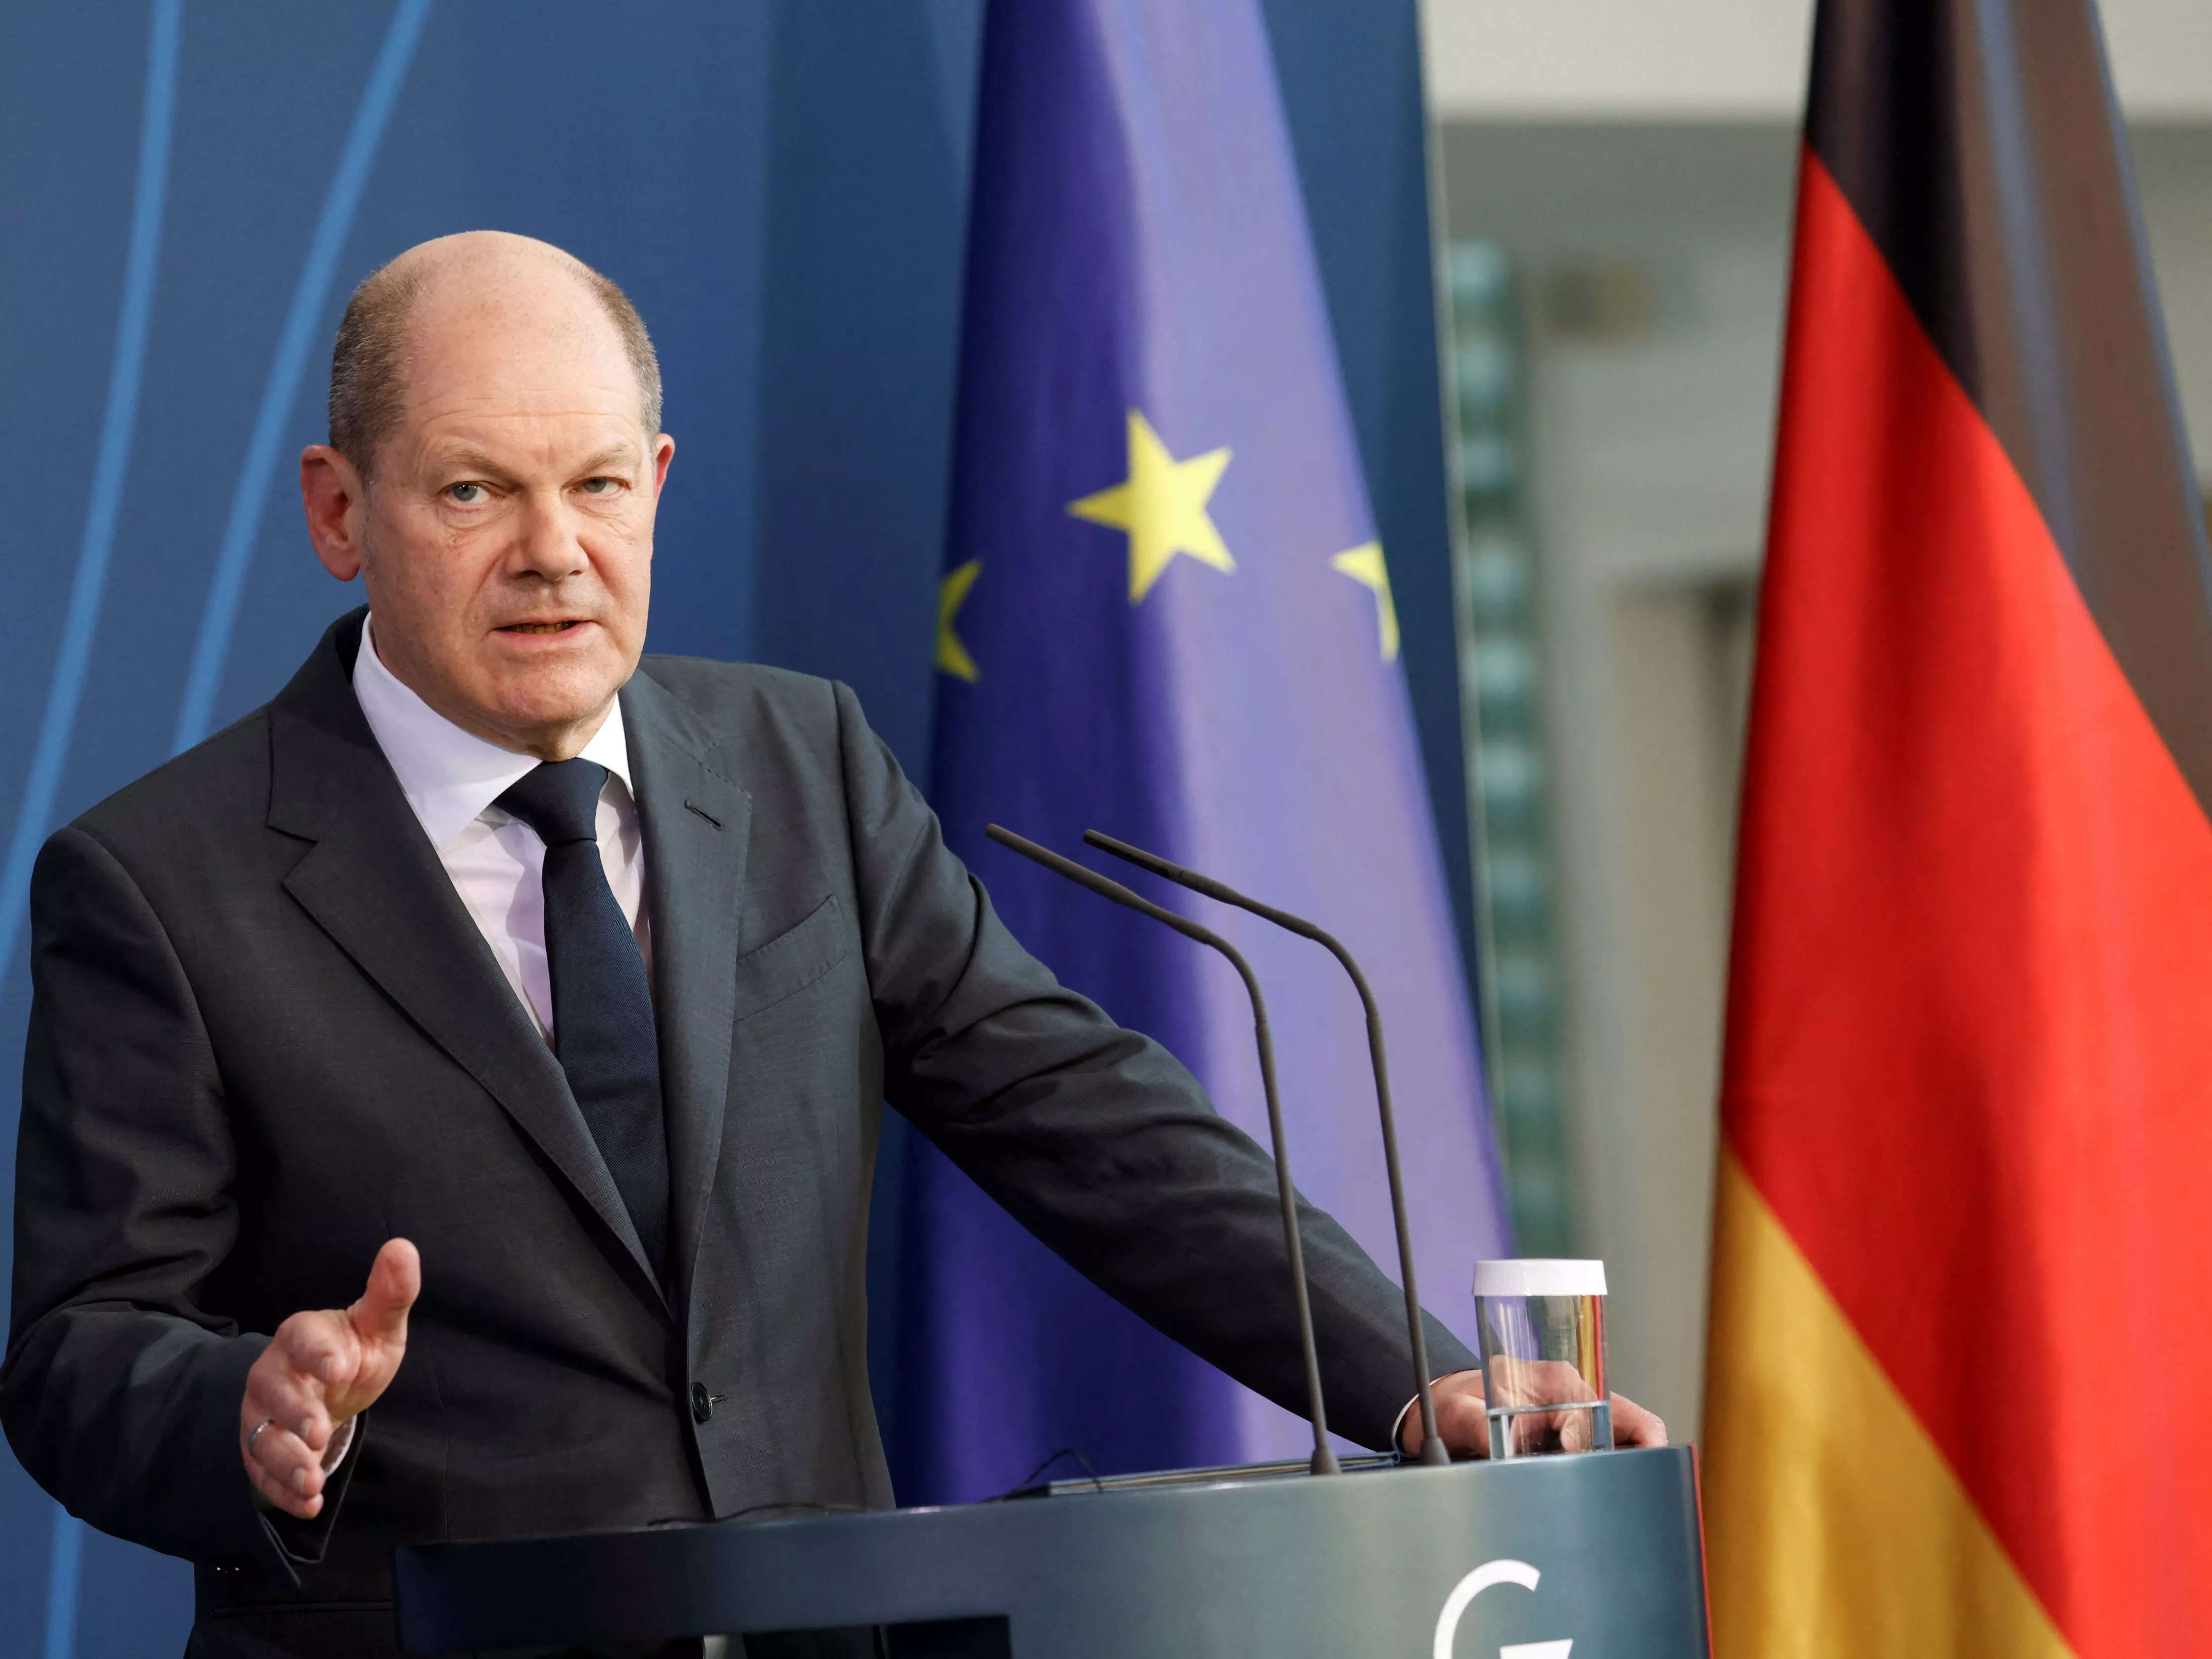 German Chancellor Olaf Scholz addresses the media during a joint statement with European Parliament President Roberta Metsola at the Chancellery in Berlin, Germany, Tuesday, March 22, 2022.